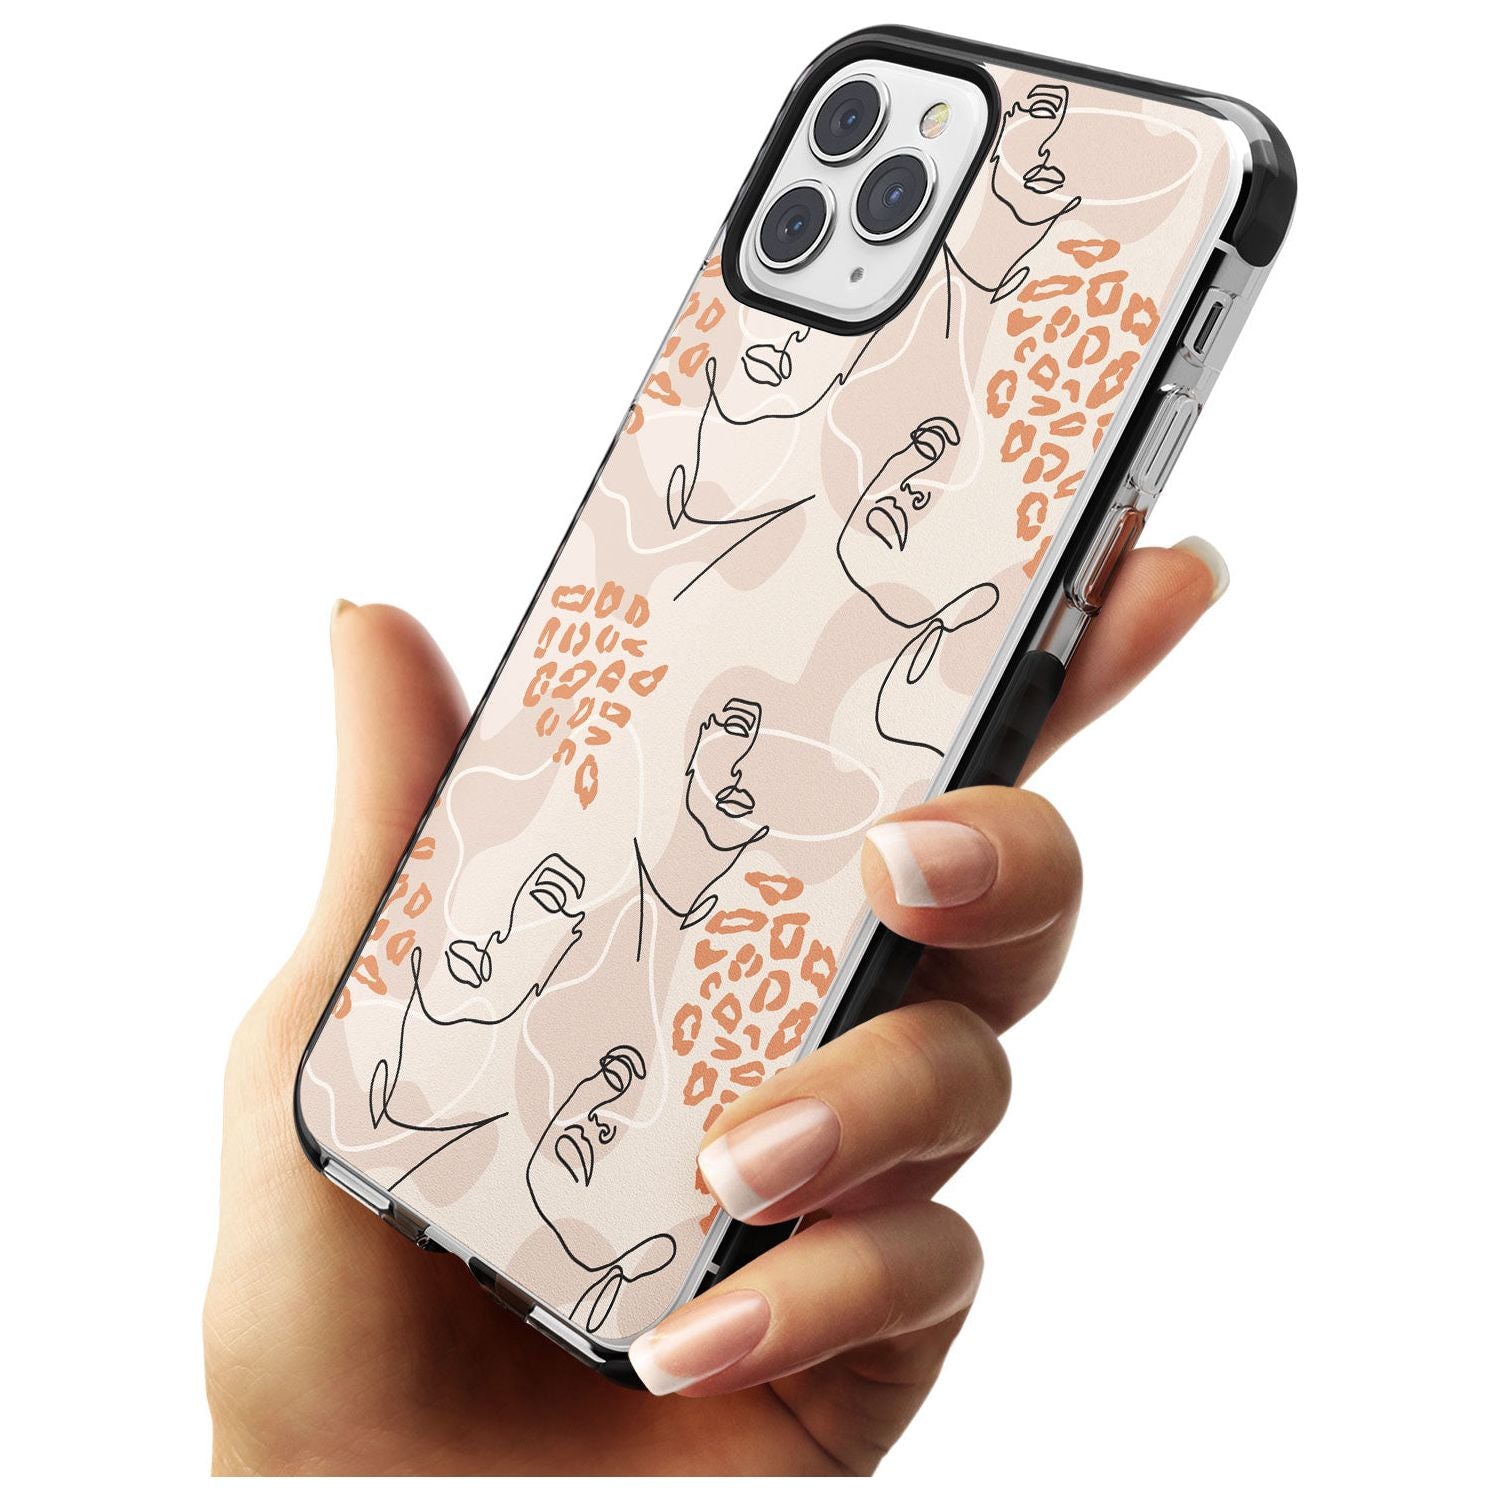 Leopard Print Stylish Abstract Faces Black Impact Phone Case for iPhone 11 Pro Max